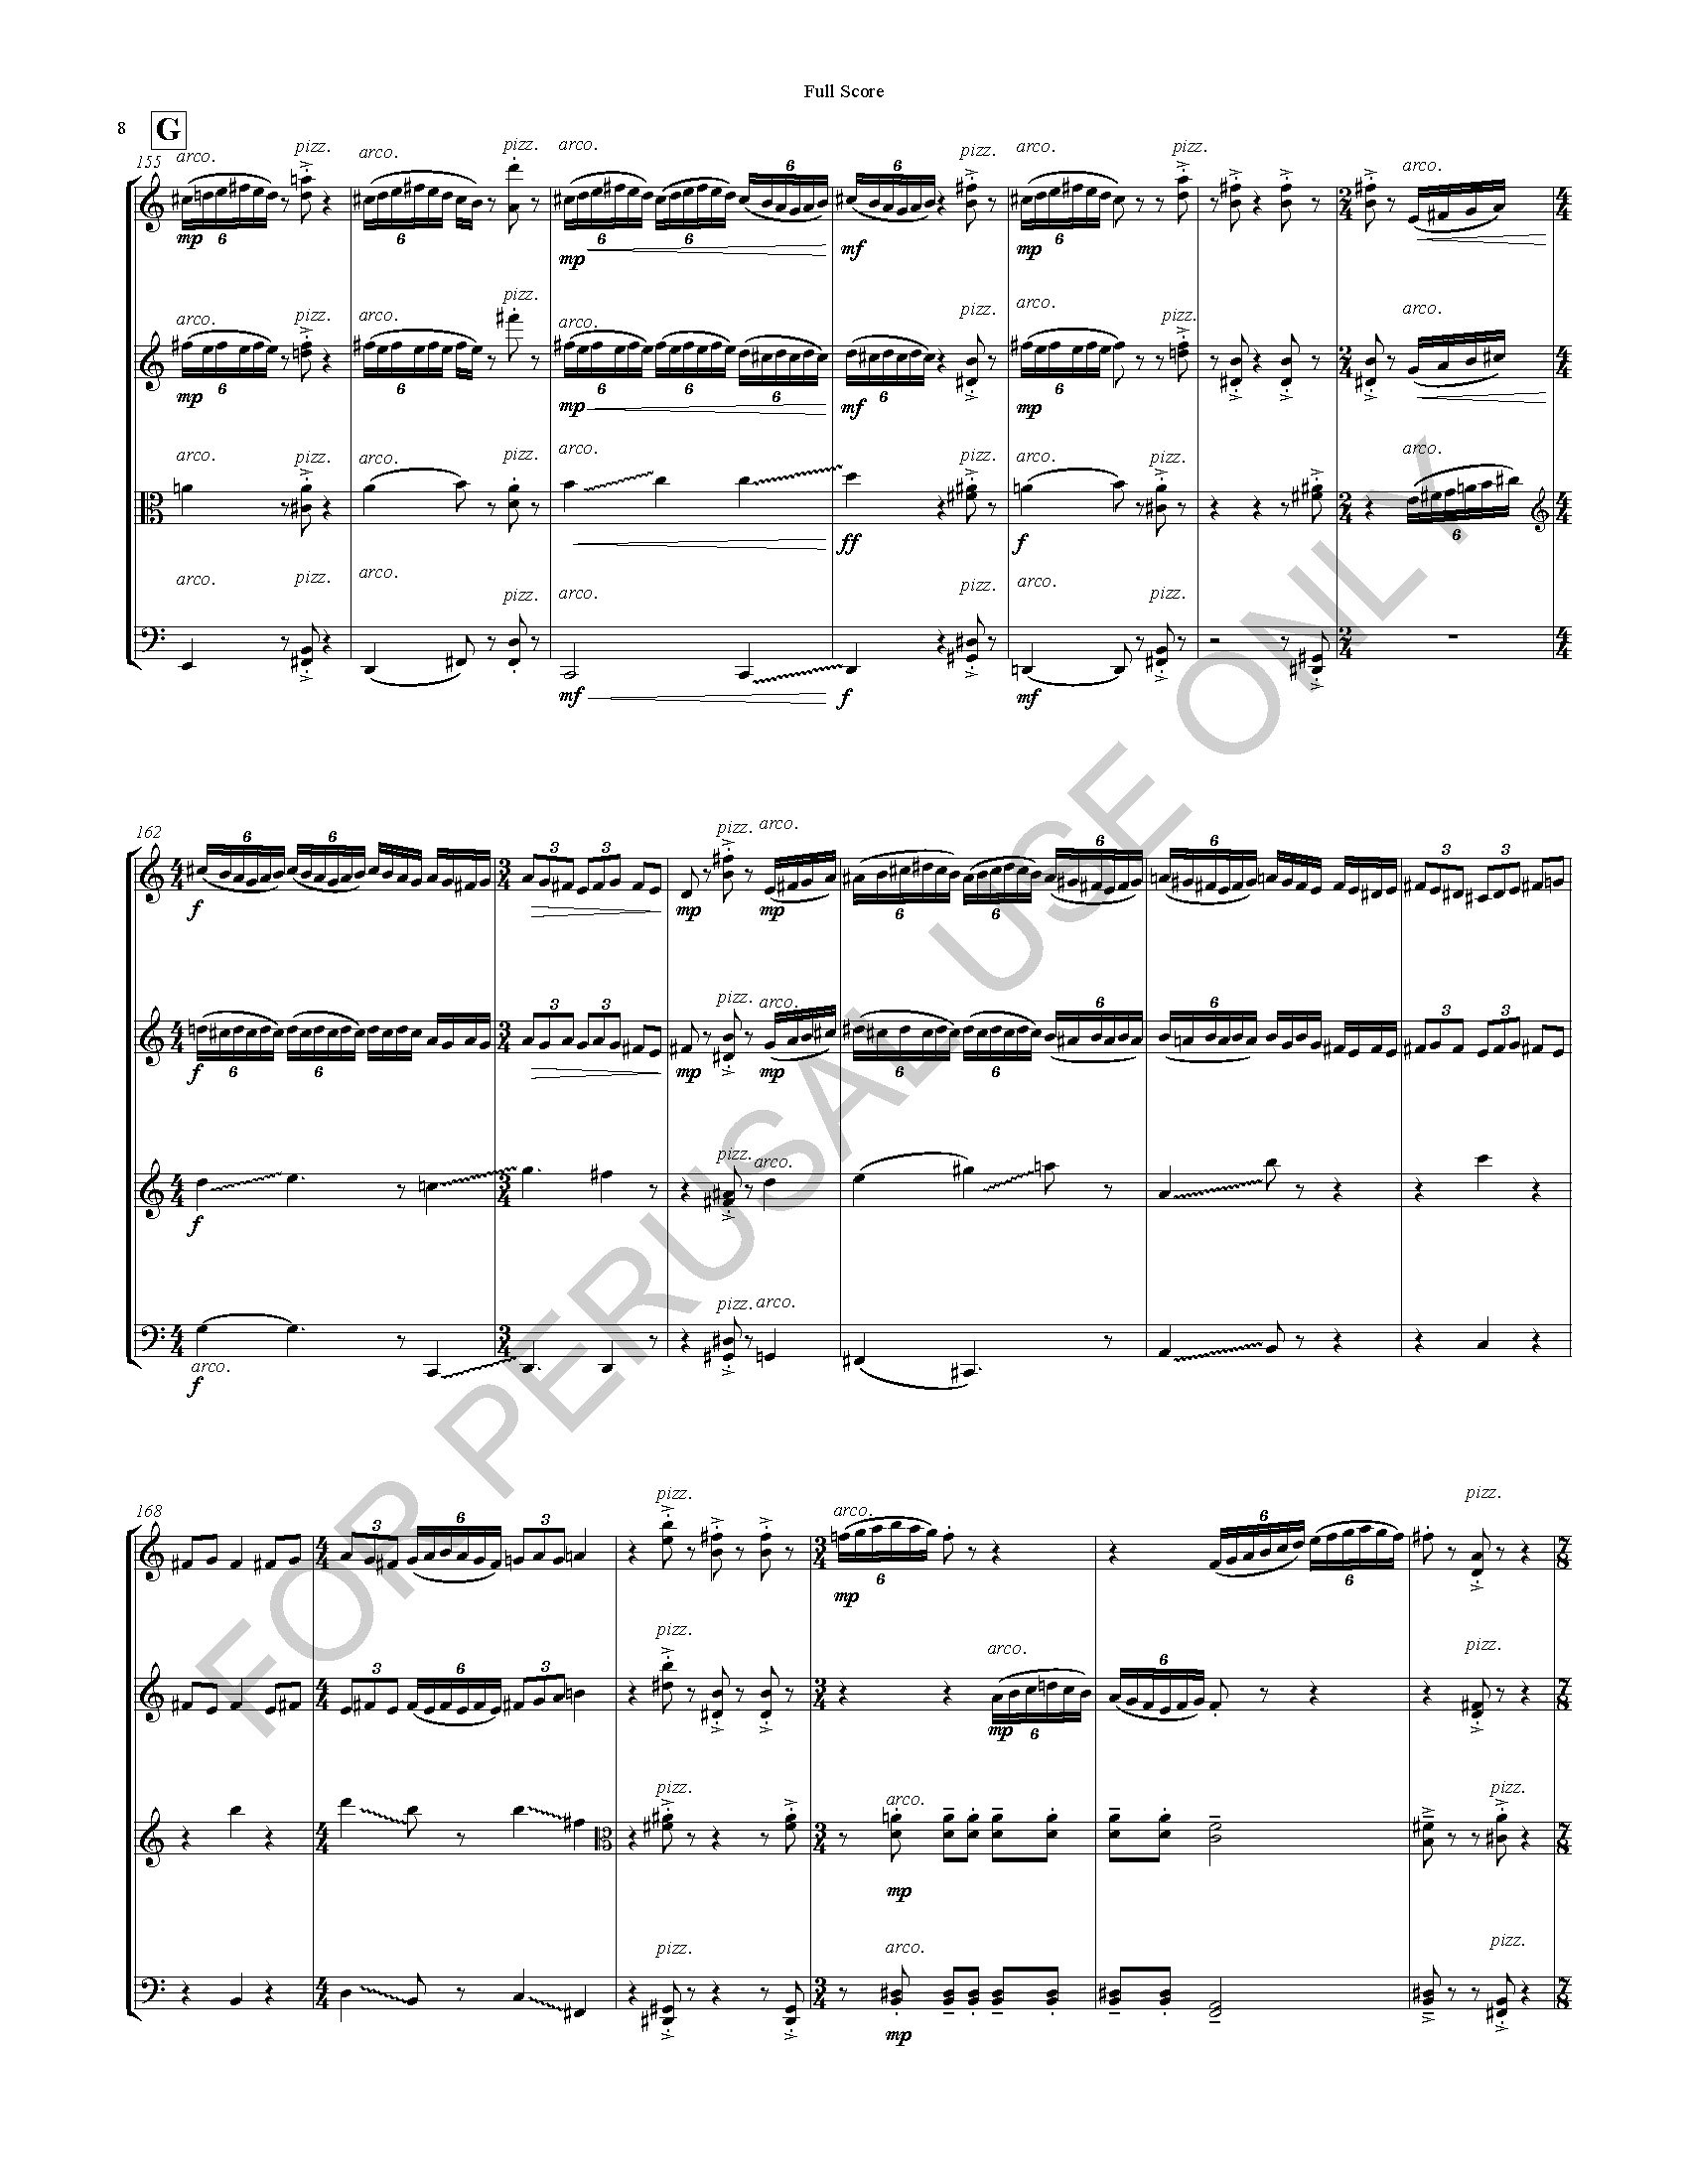 REFERENCE Smear Music (Full Score)_Page_08.jpg